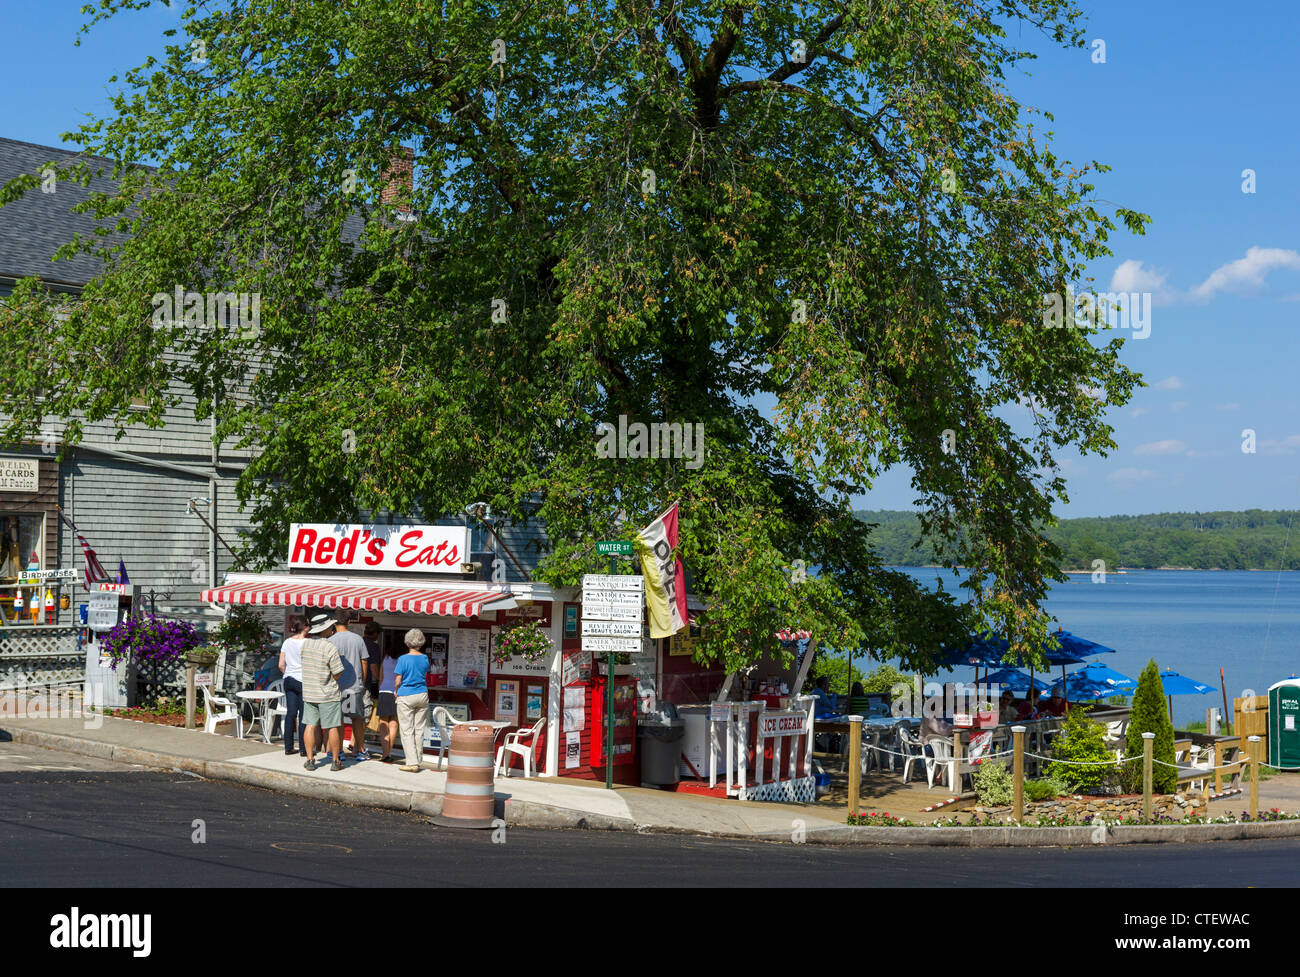 The famous Red's Eats lobster shack take-out restaurant on US Route 1 in Wiscasset, Lincoln County, Maine, USA Stock Photo